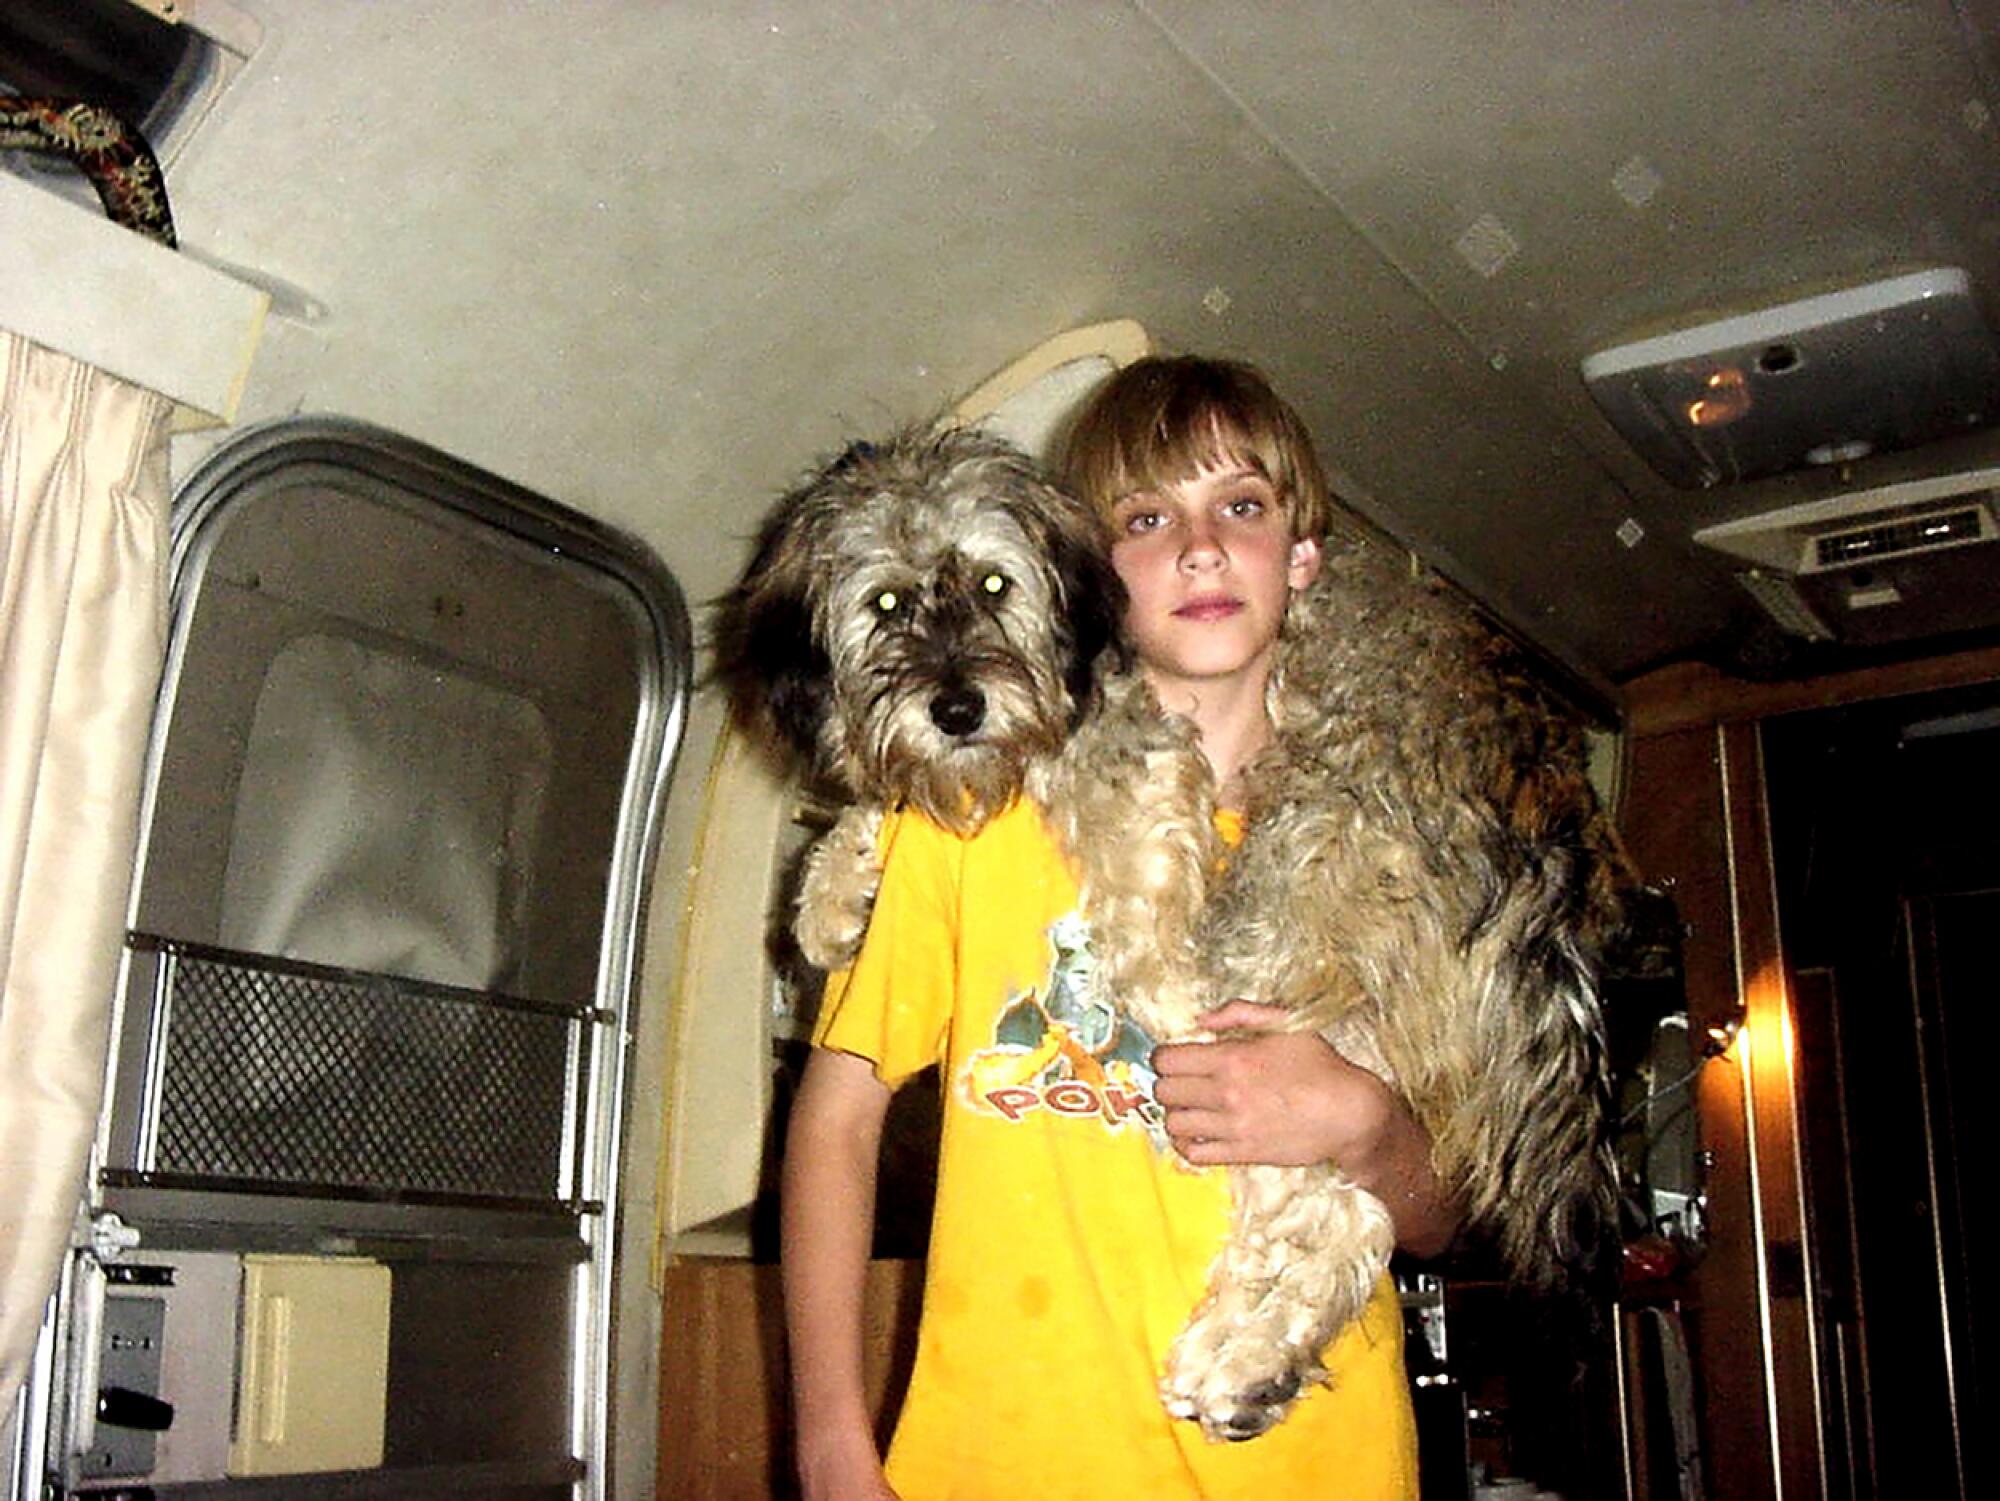 A childhood photo of Zoë Bossiere, in a yellow T-shirt, standing in an RV with a dog on their shoulders.